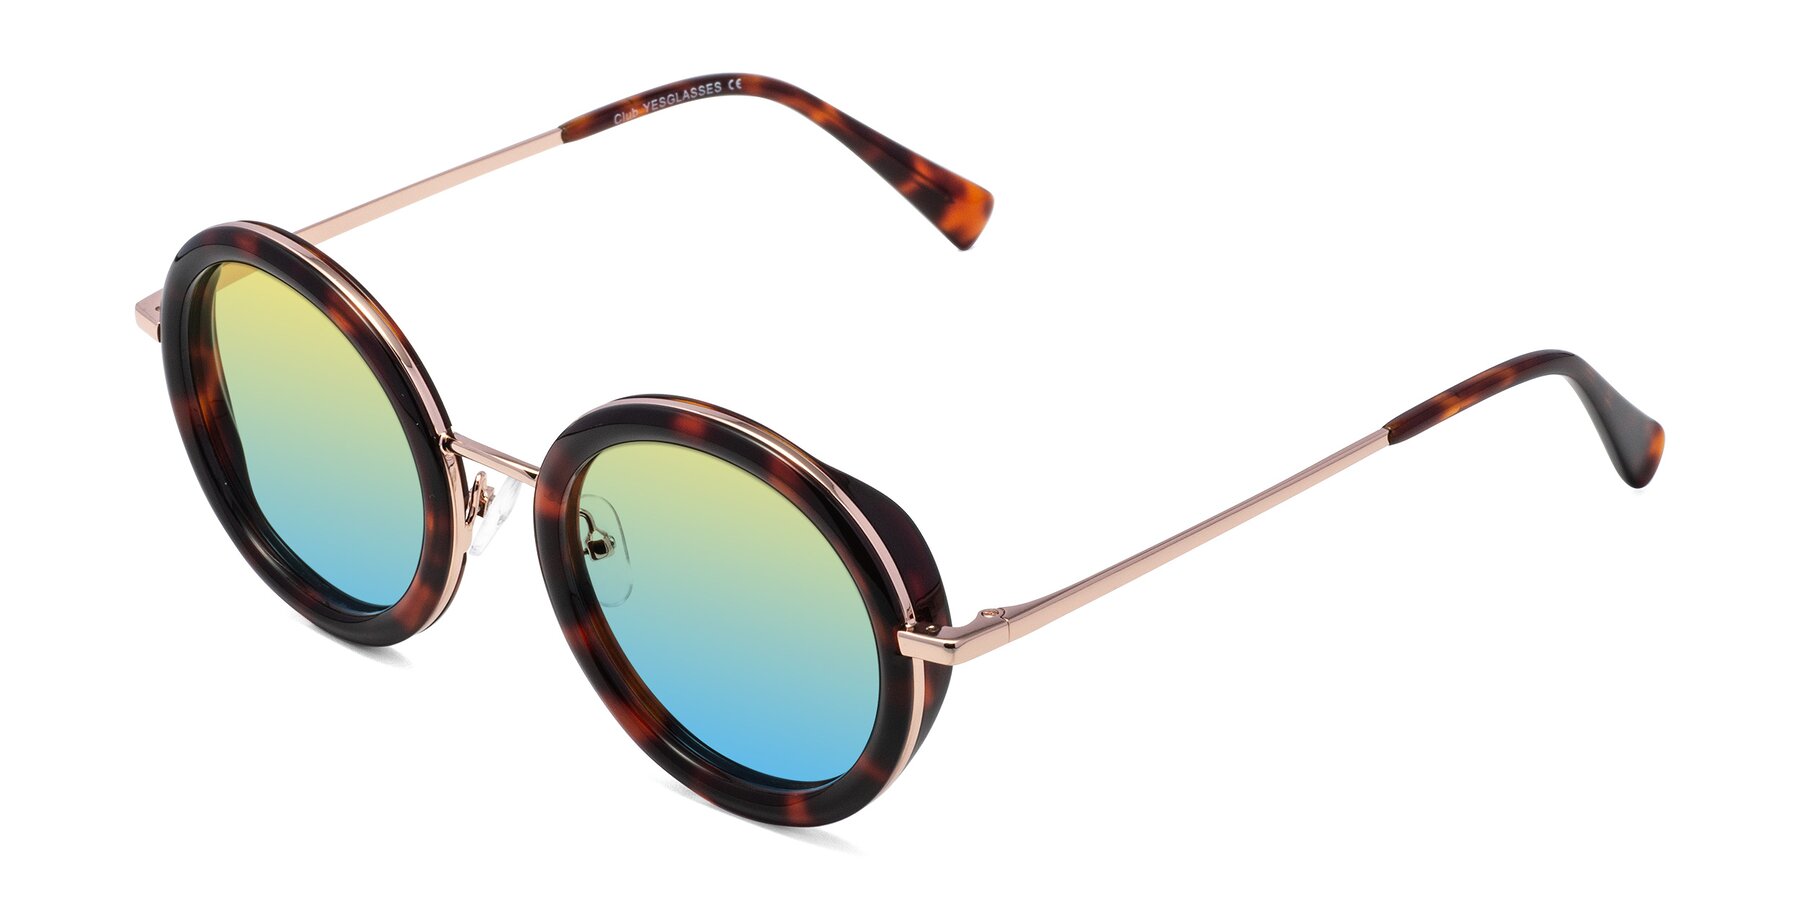 Angle of Club in Tortoise-Rose Gold with Yellow / Blue Gradient Lenses